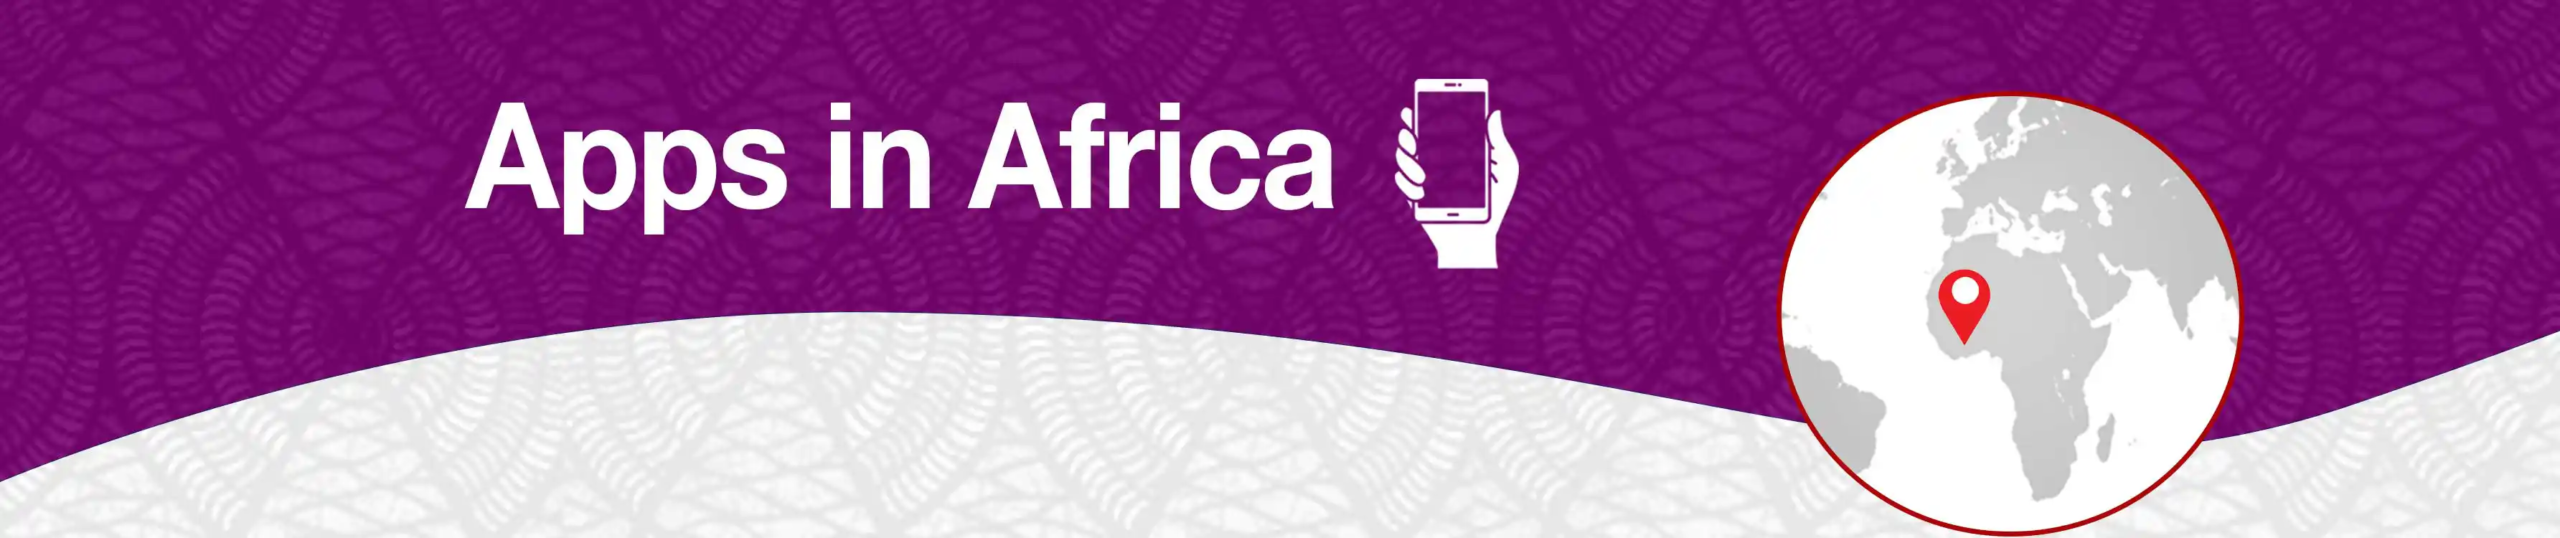 Apps in Africa